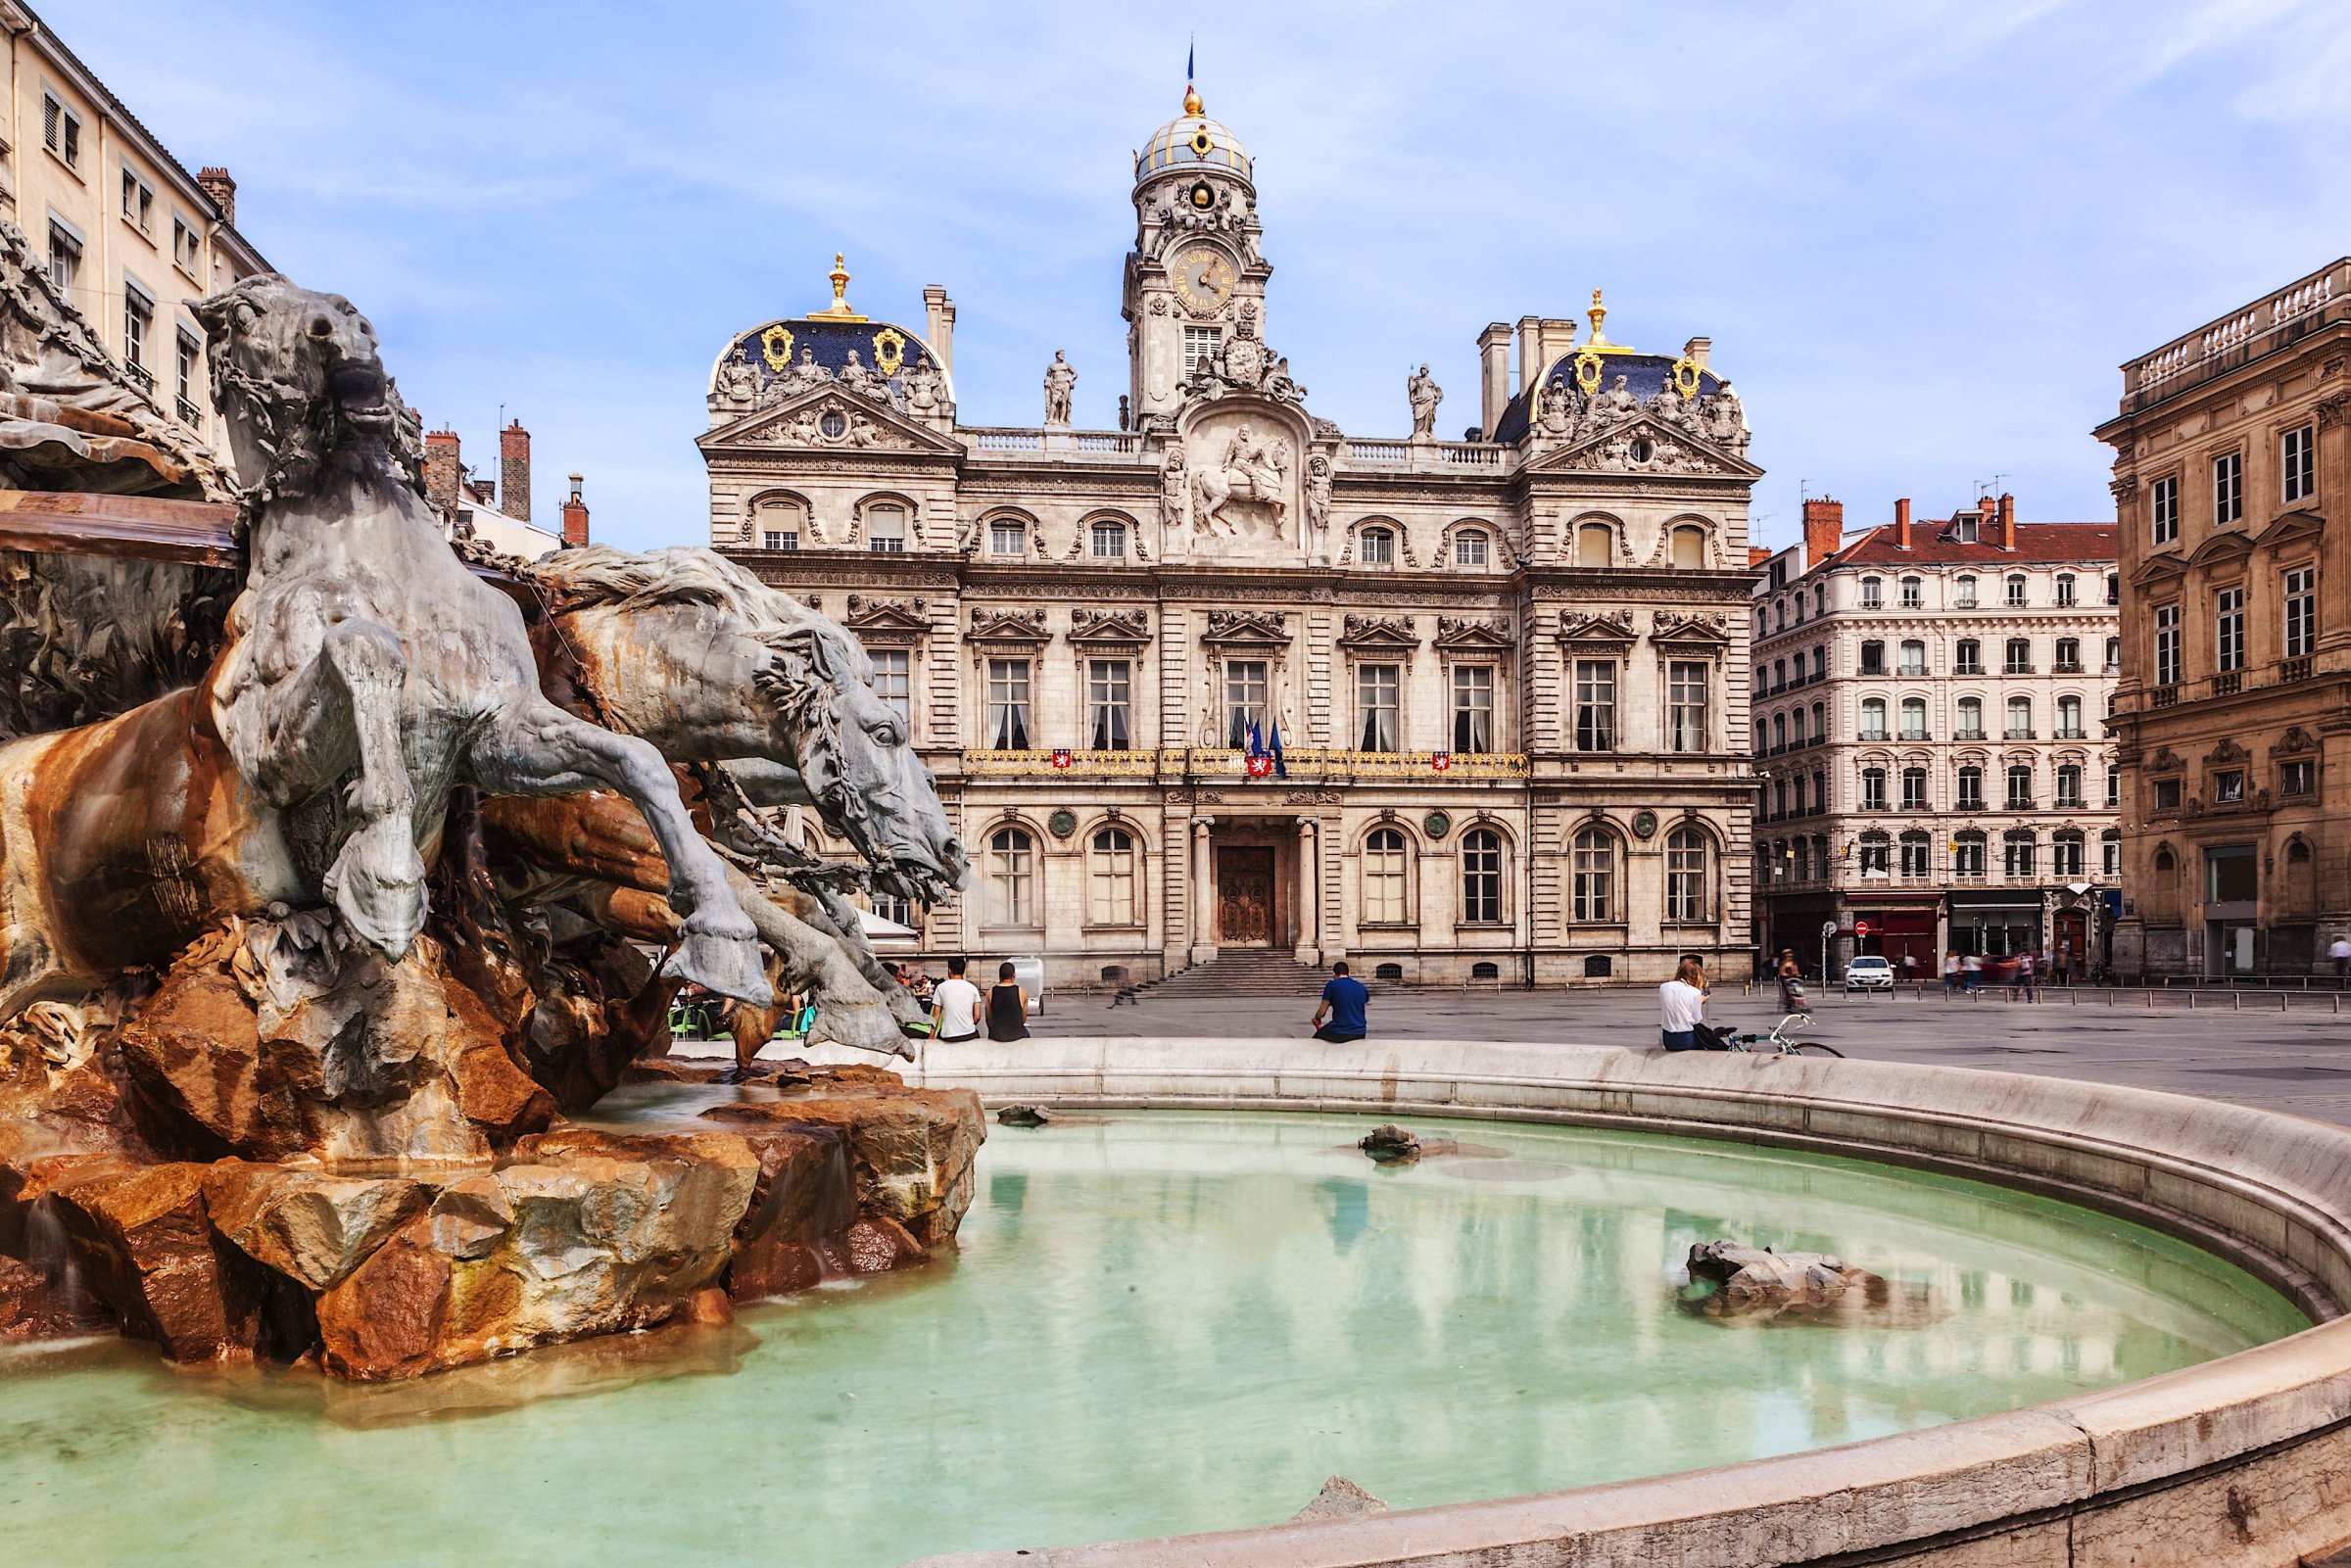 The 15 day belgium honeymoon itinerary for those in love